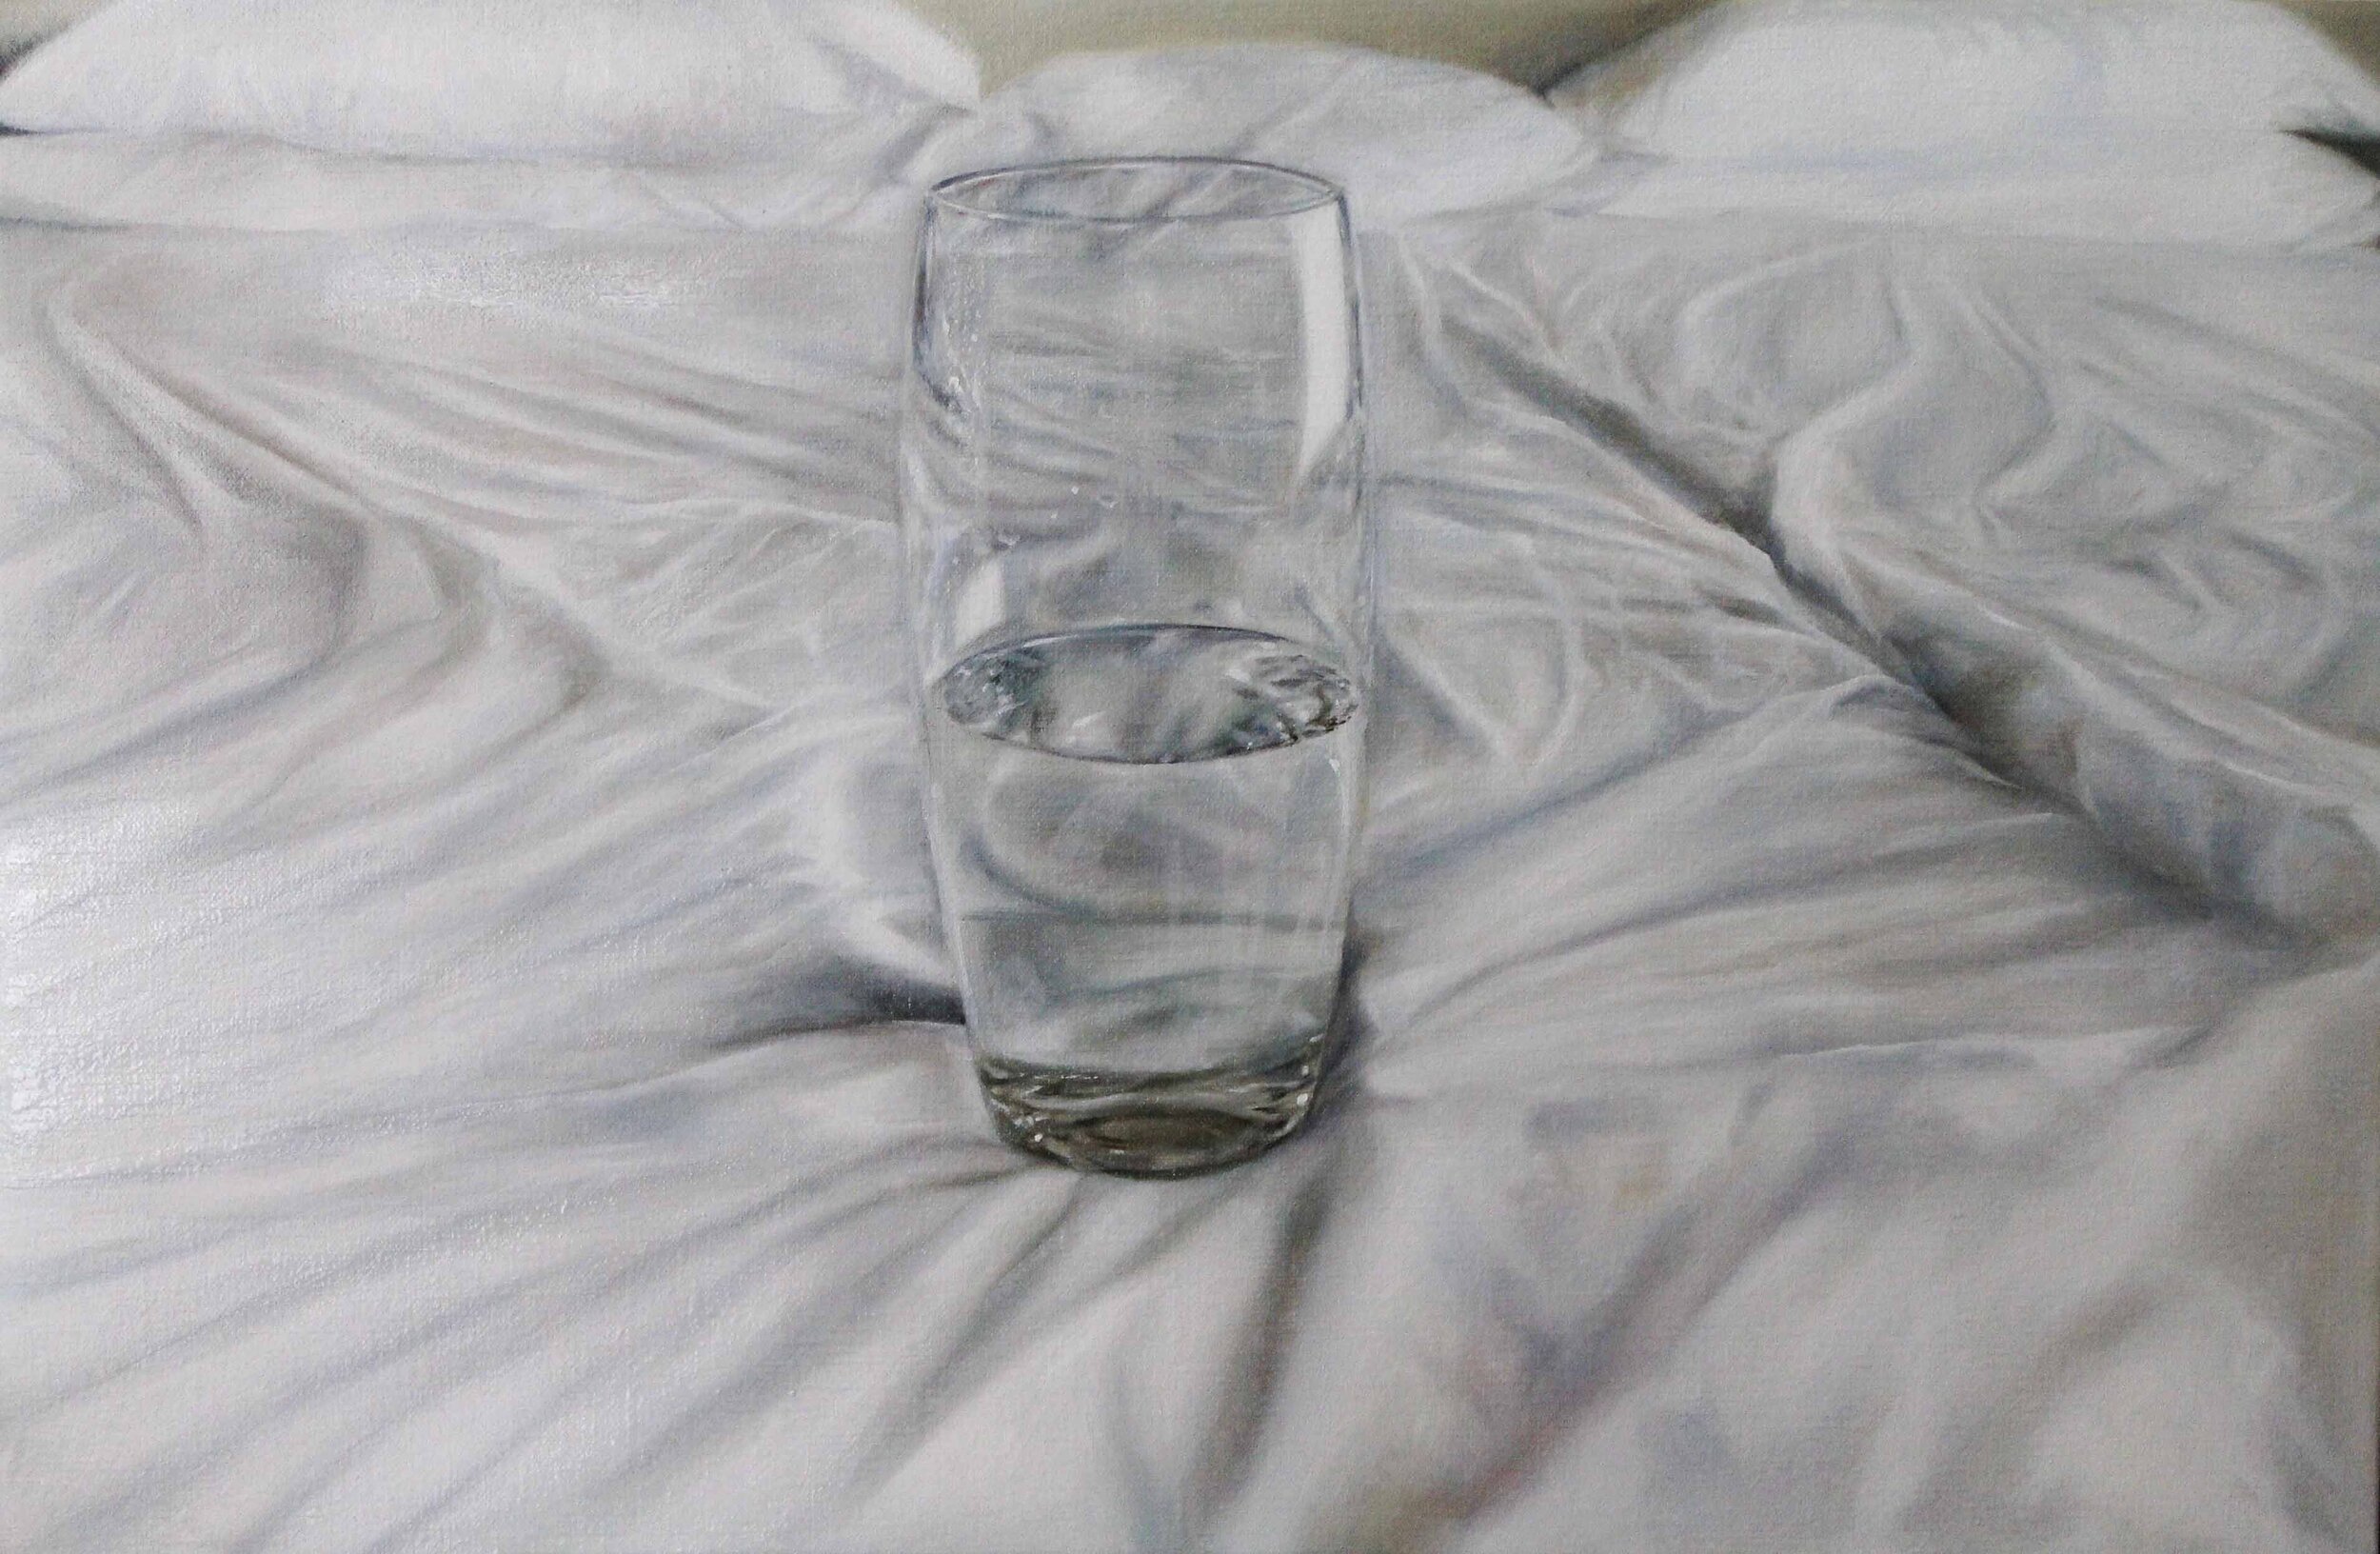 Glass of Water Left on Bed, 14"x9"